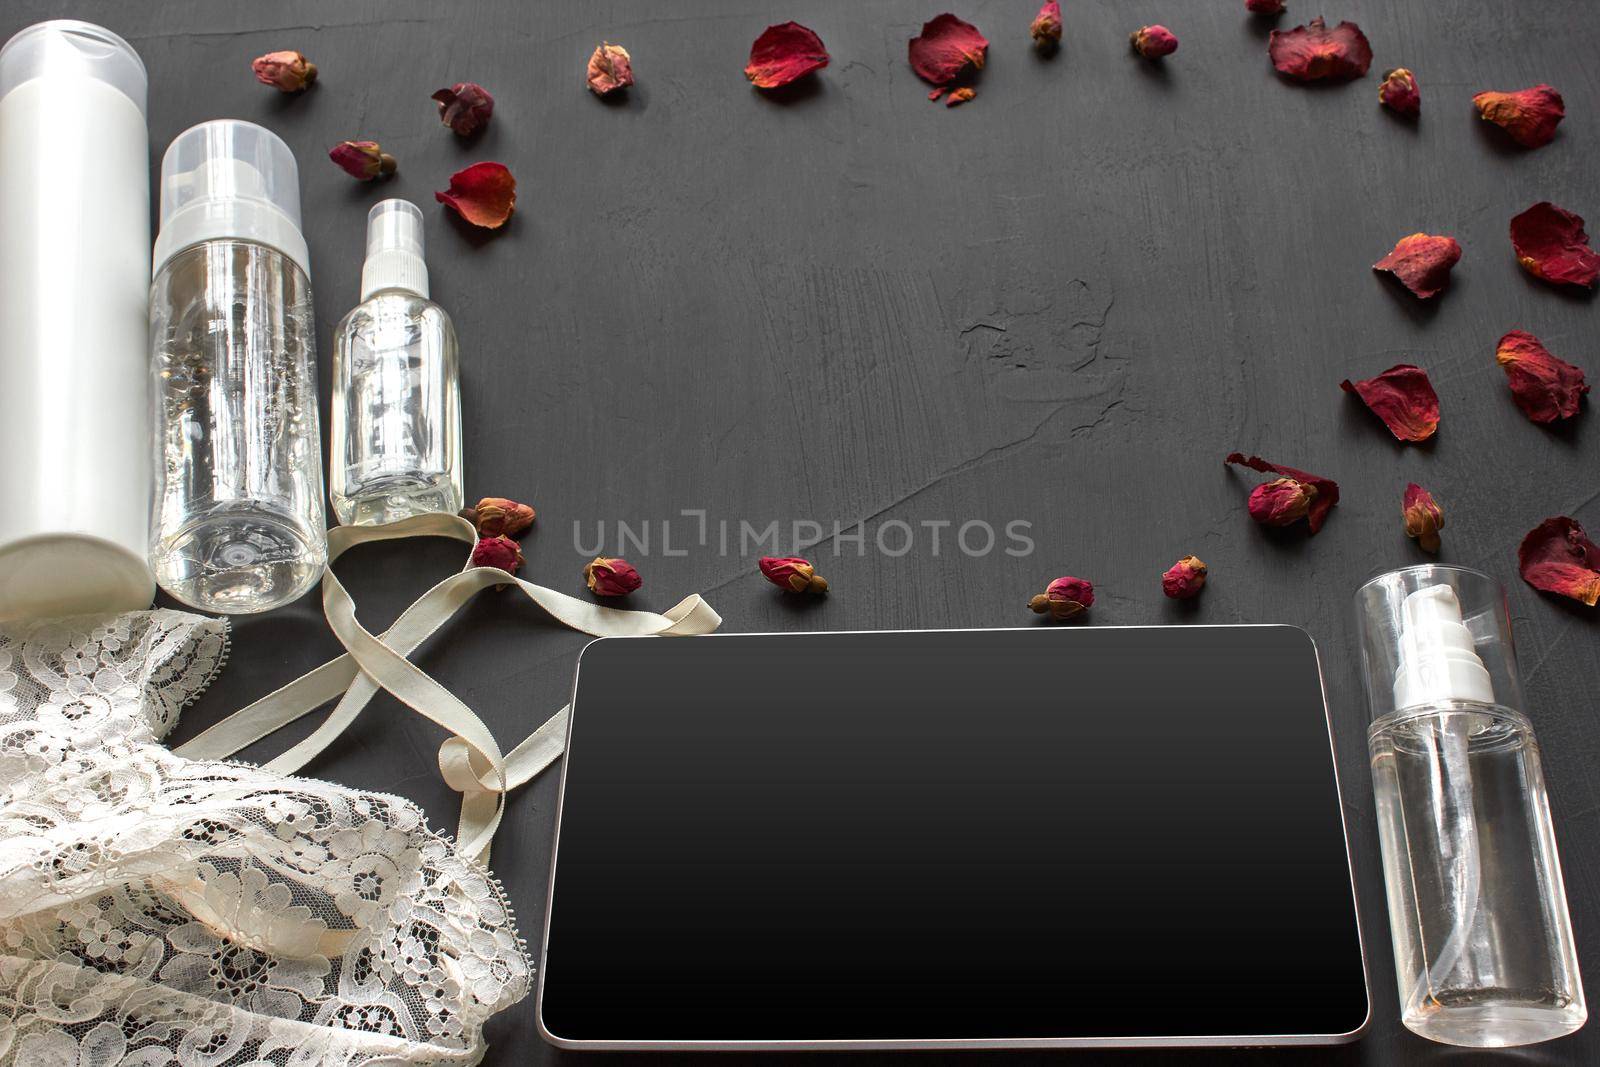 Skin care cosmetic products without label, white lace lingerie and a tablet on a black background with copy space, decorated with dried rose buds. Beauty trends, top view. Branding mockup.